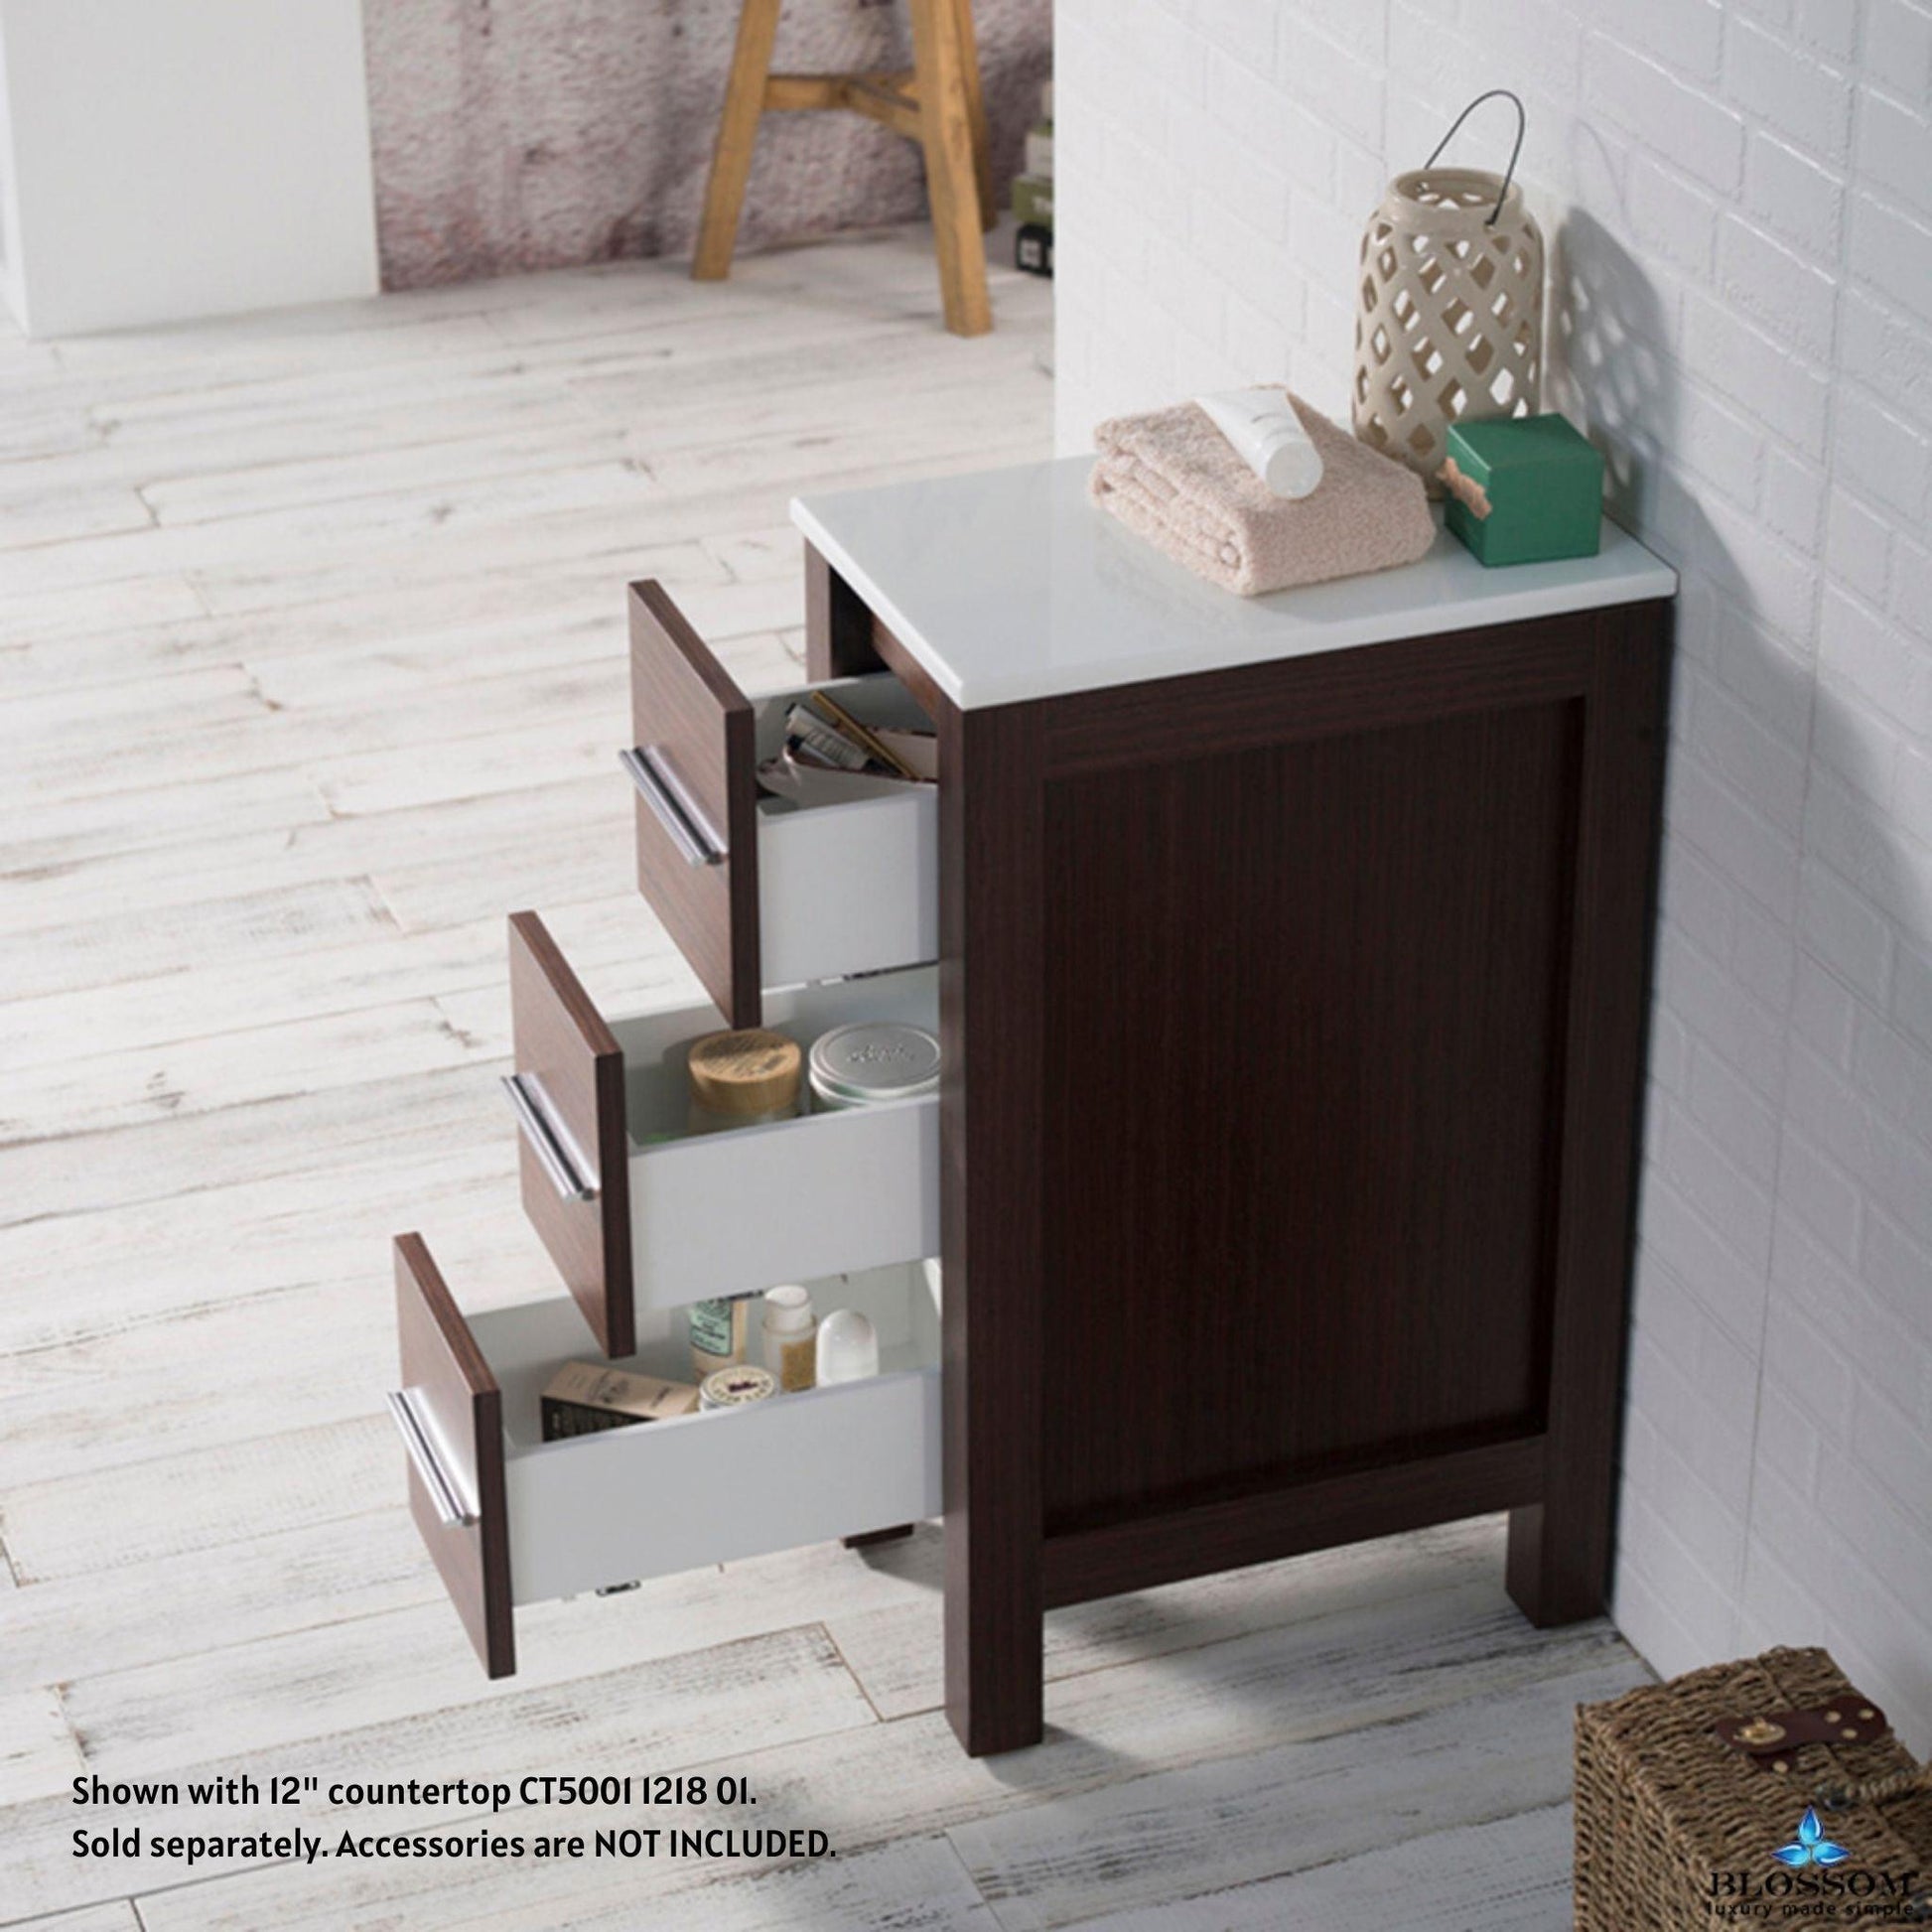 Blossom Sydney 12" x 30" Wenge Freestanding Side Cabinet With 3 Drawers